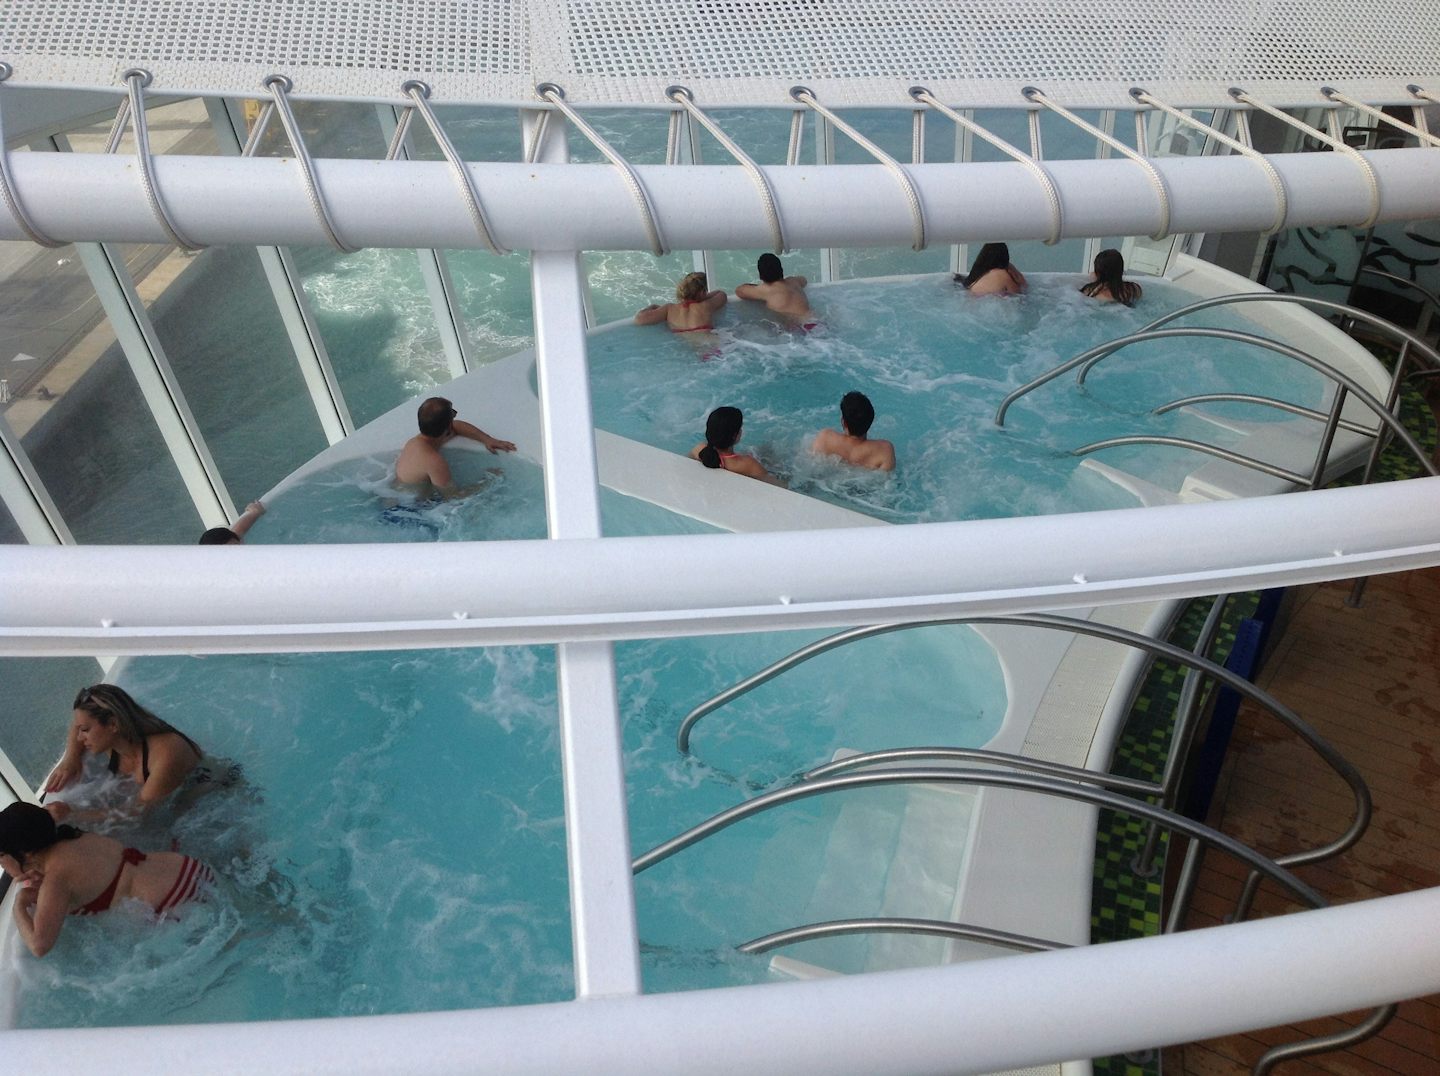 This is one of the hot tubs on board. Children are not allowed in this part